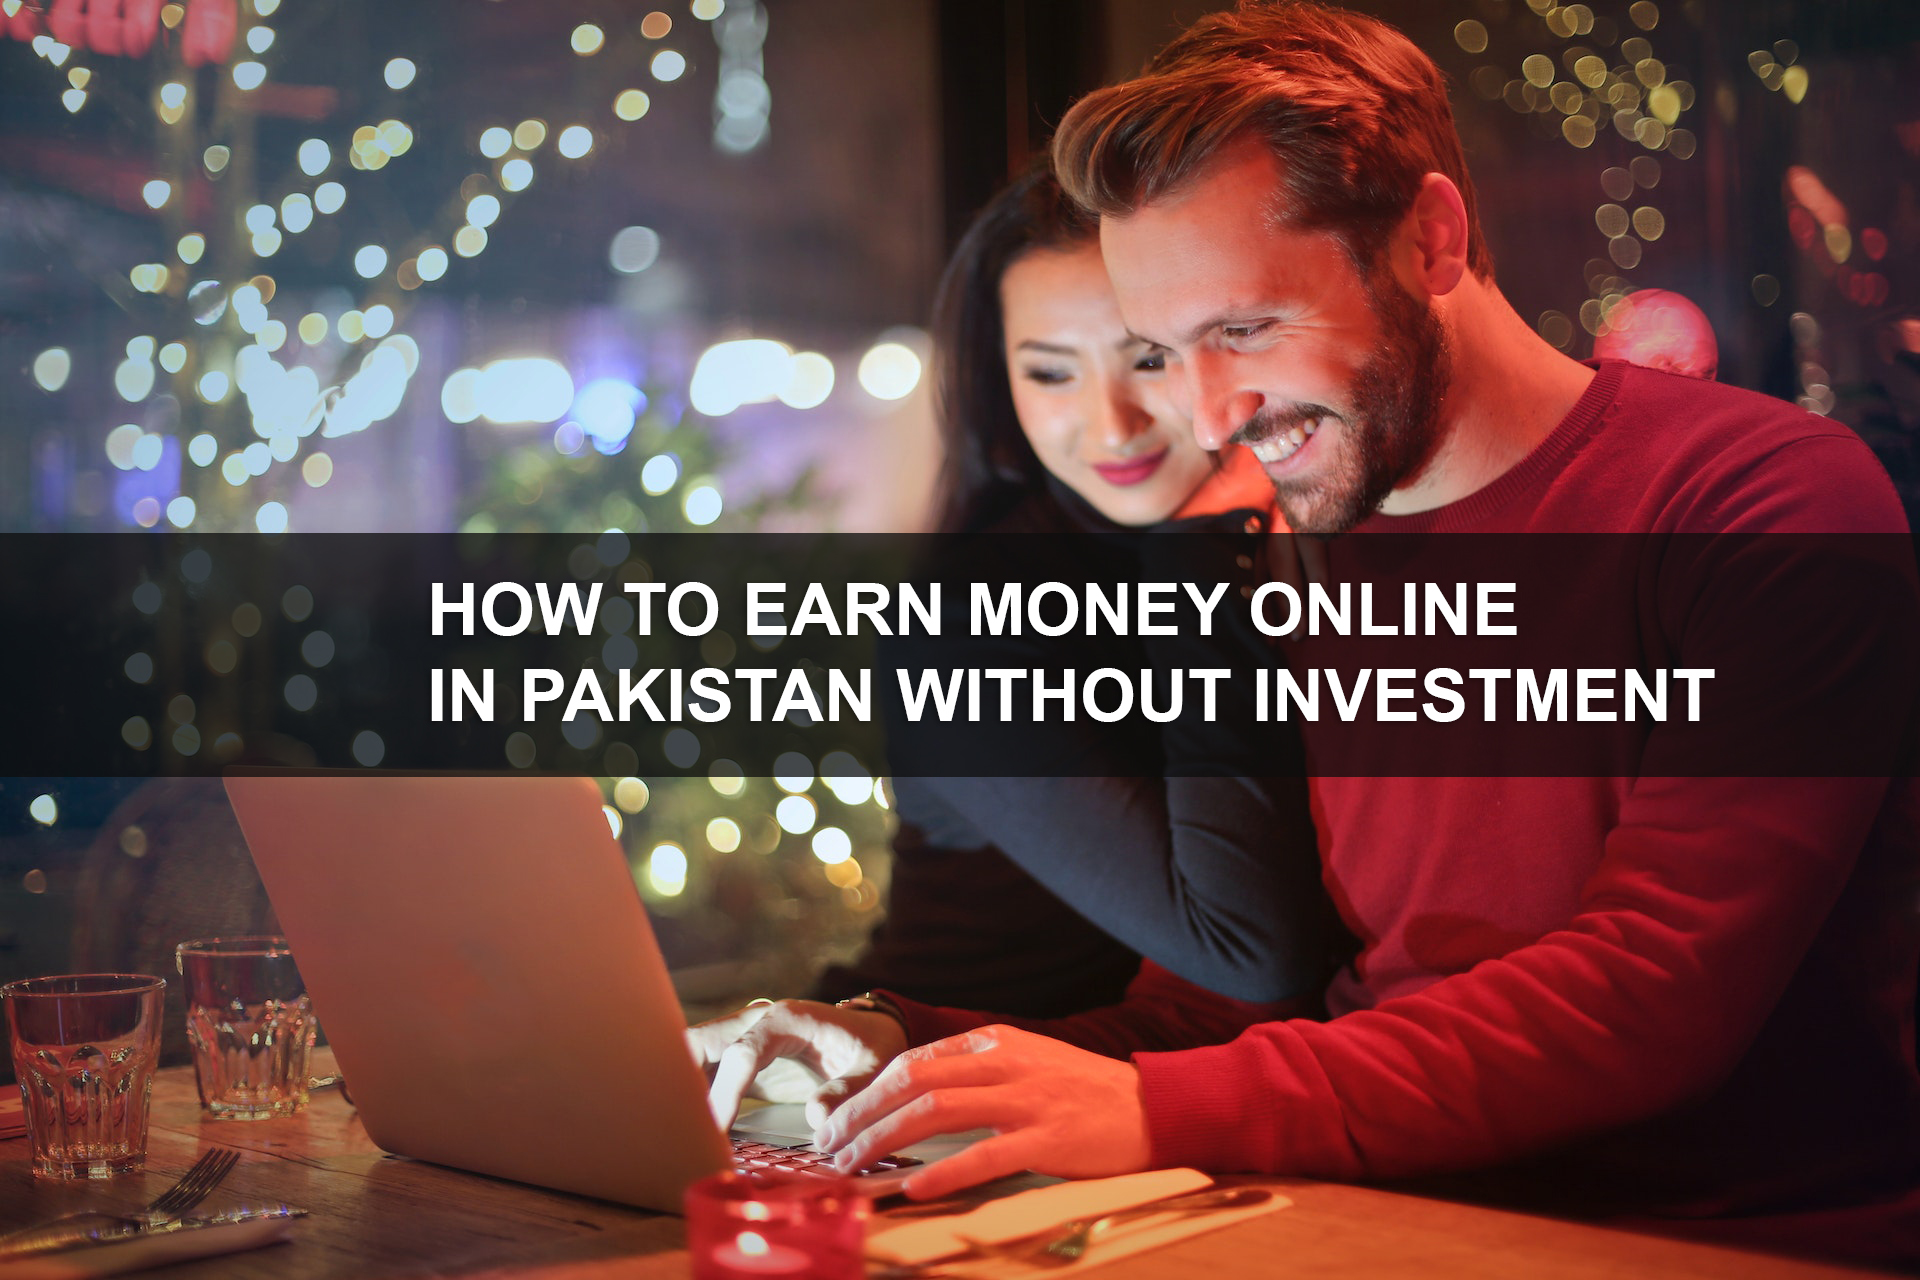 How to Earn Money Online in Pakistan without Investment